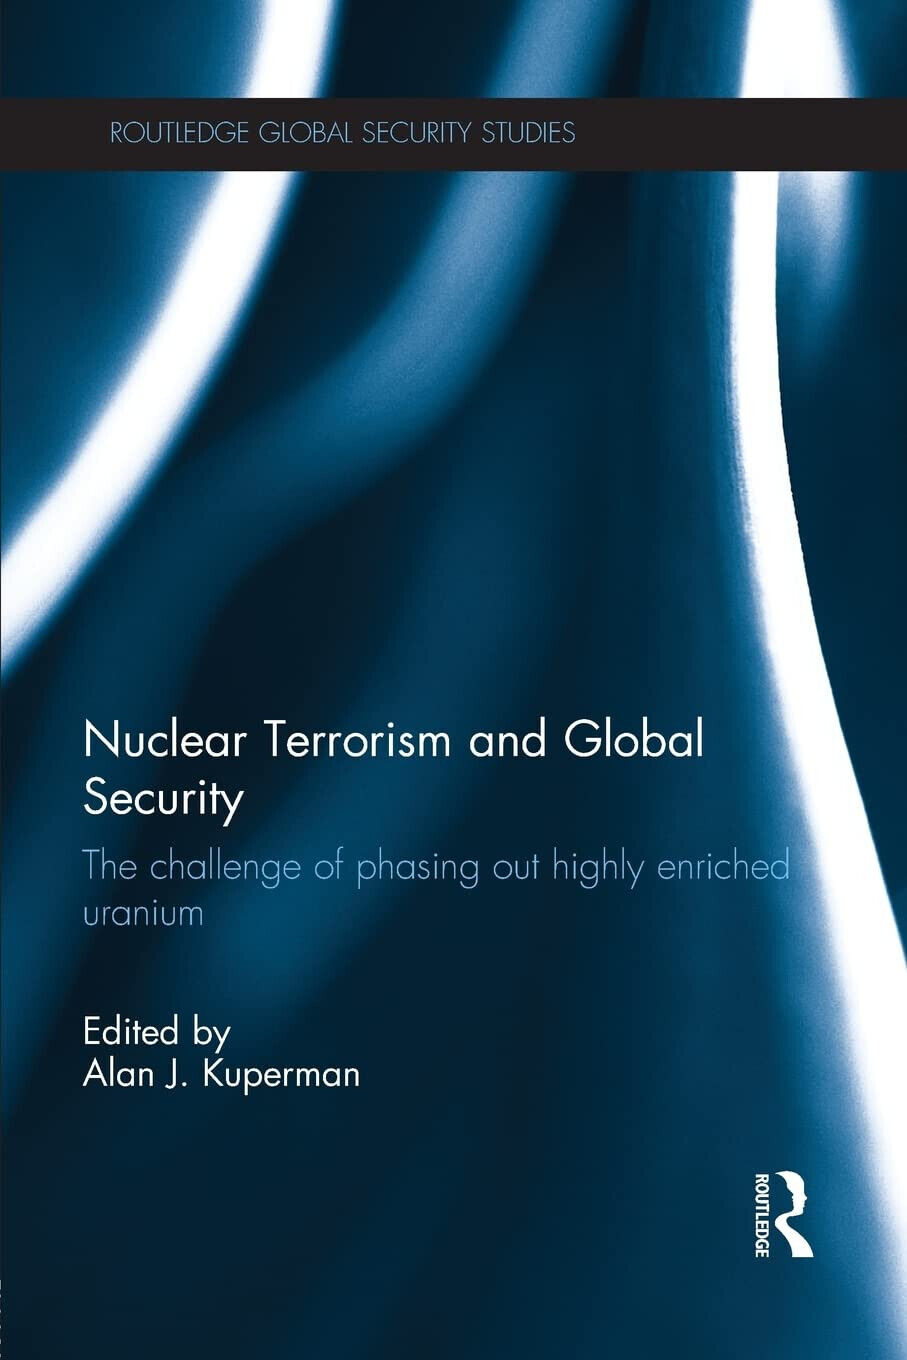 Nuclear Terrorism and Global Security - Alan J. Kuperman - Routledge, 2015 libro usato